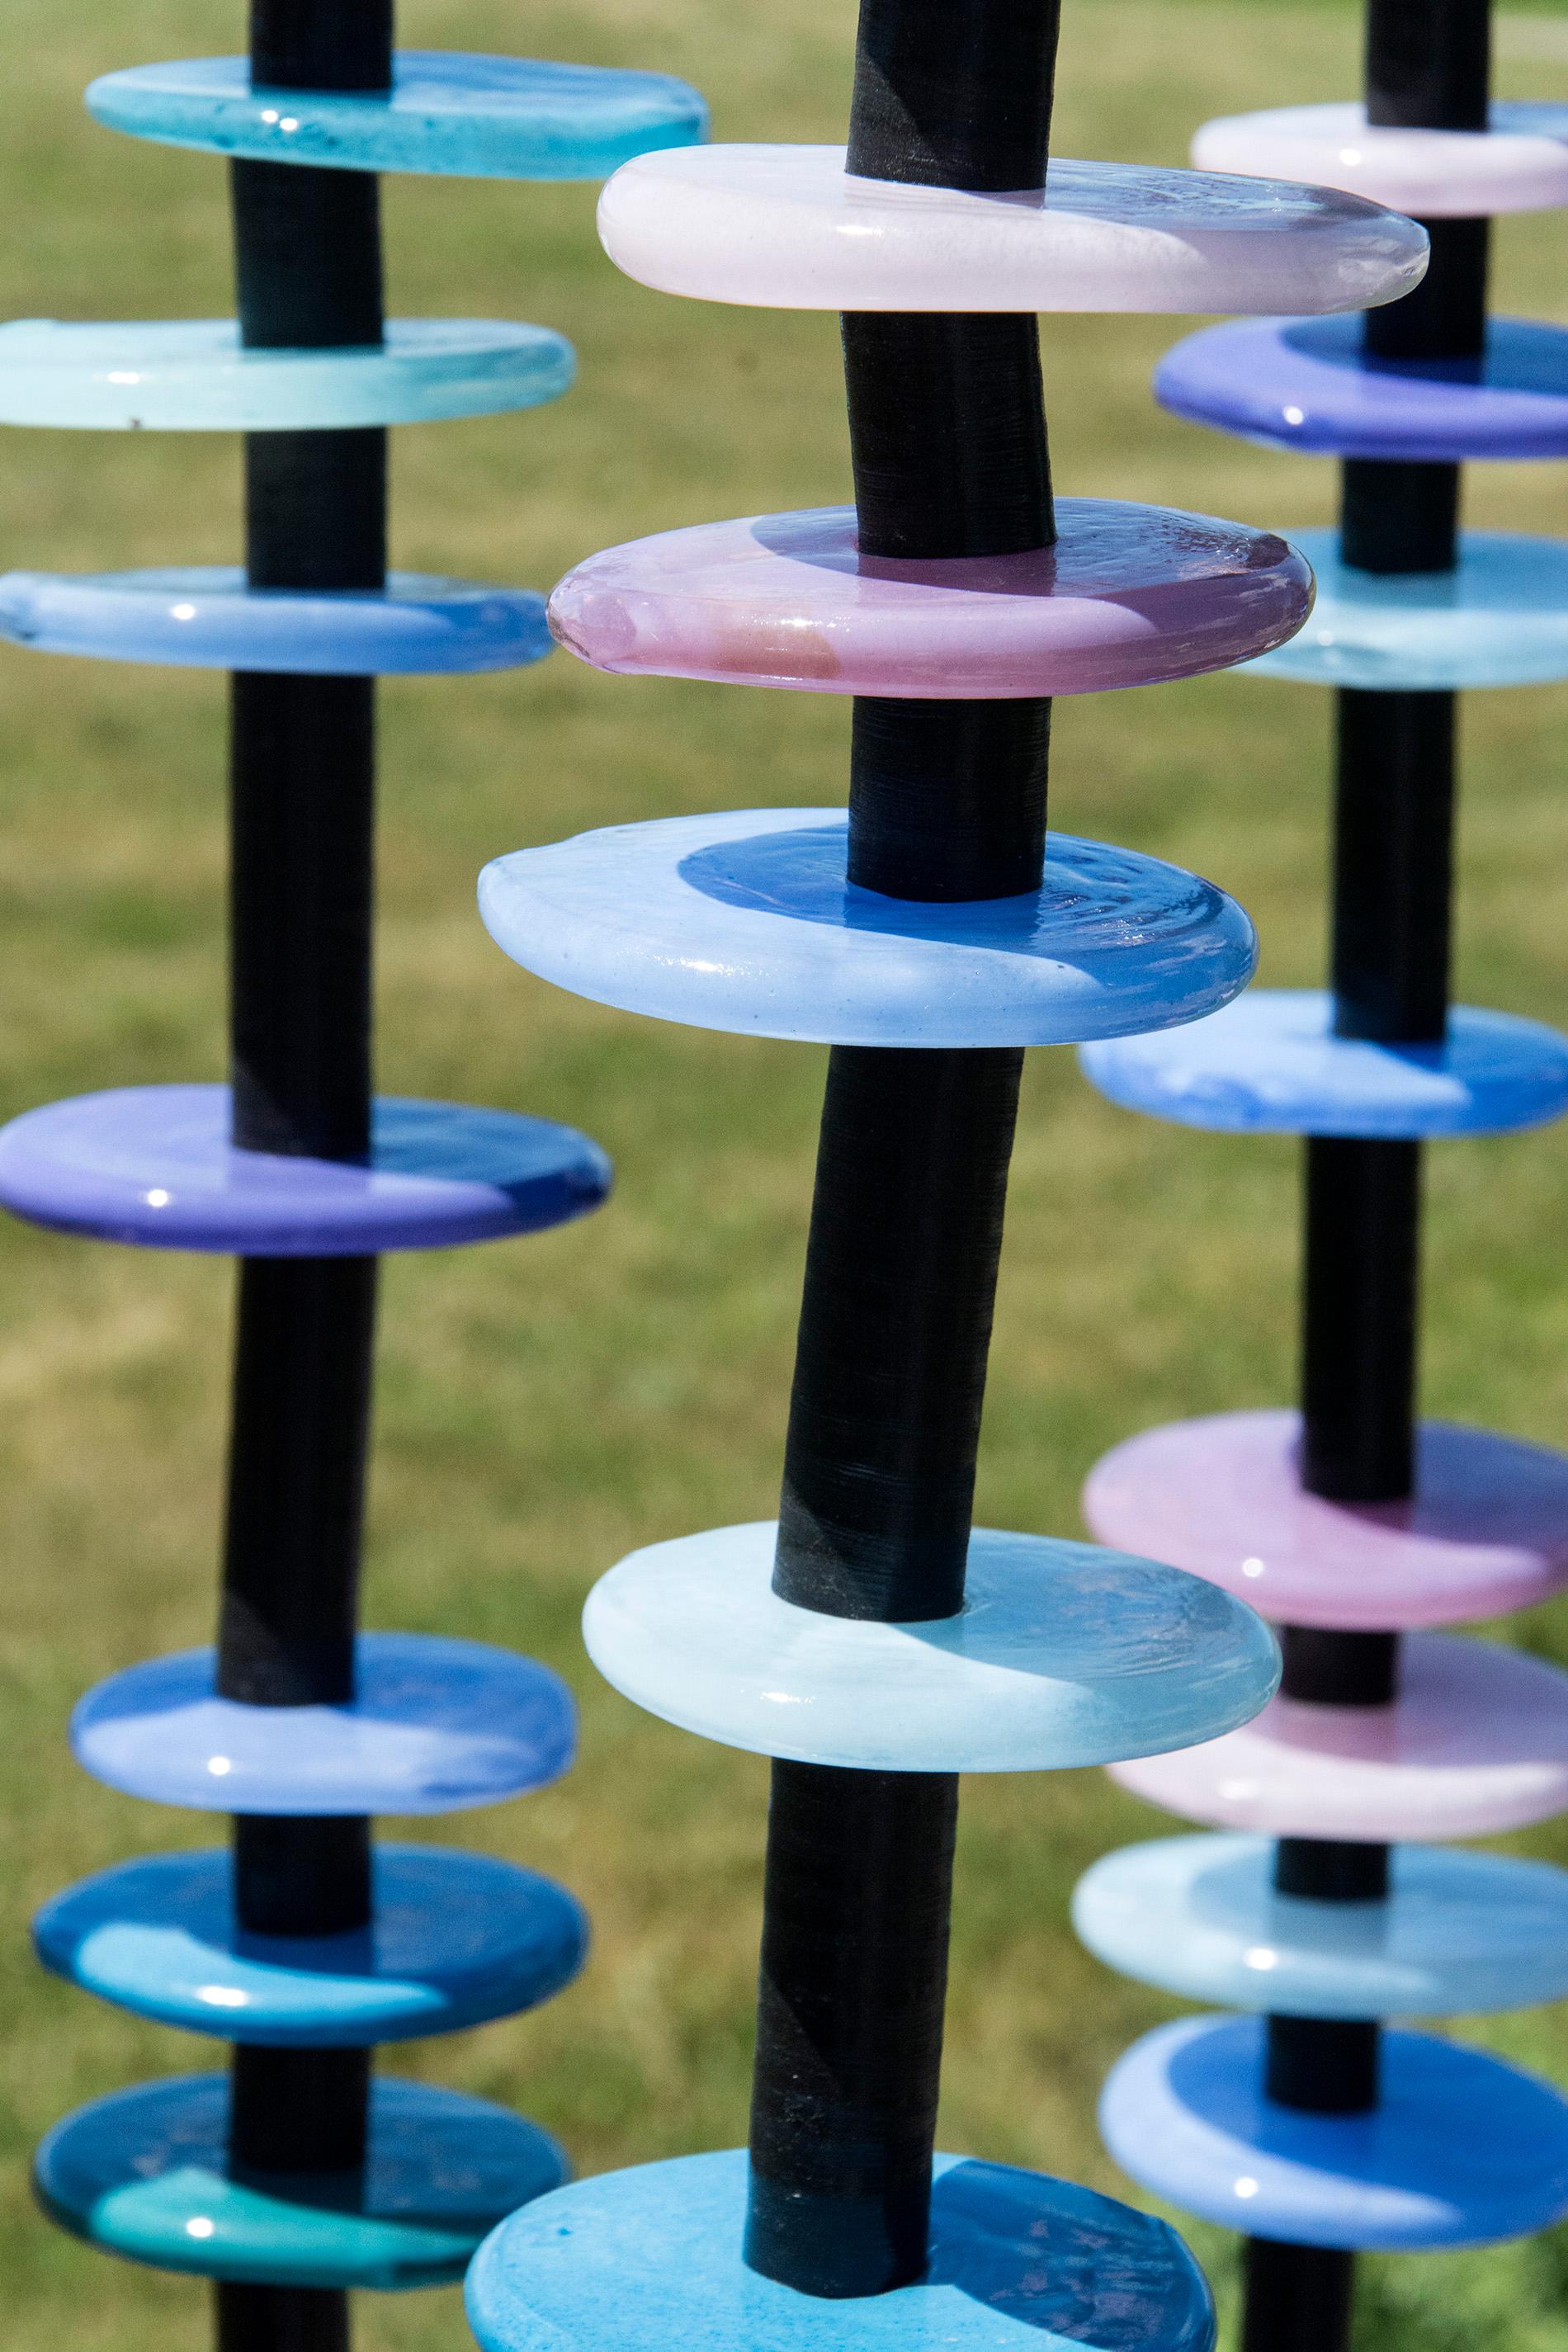 Hand blown glass rings of purple, violet and blue are stacked organically on five stems in this delightful outdoor sculpture by Susan Rankin. The stems are fixed to a steel plate and sway gently in the breeze.  Each column includes the hand formed